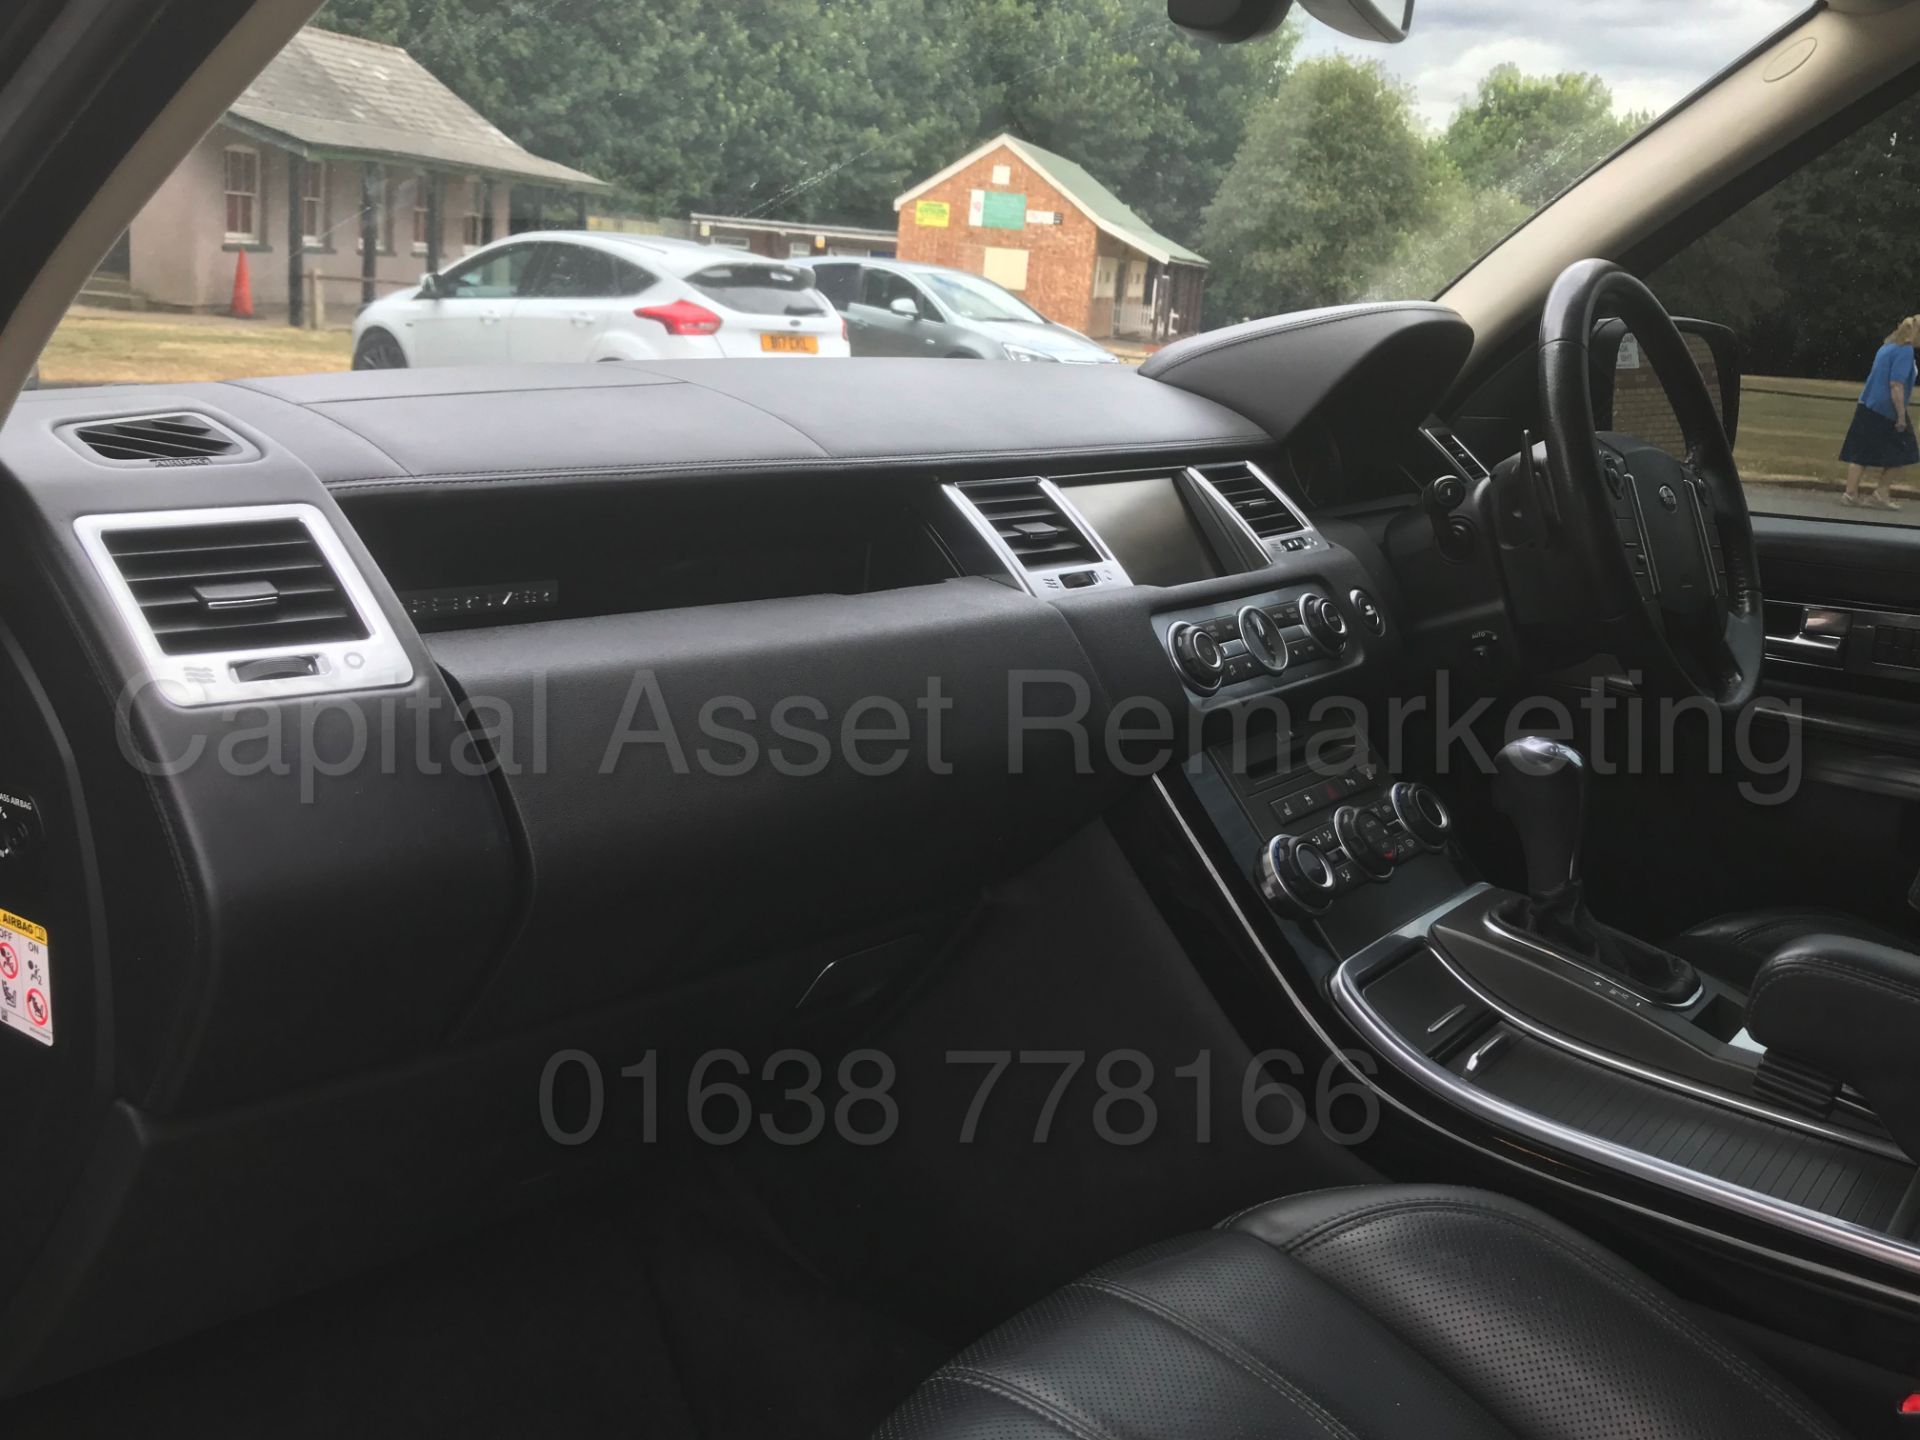 (On Sale) RANGE ROVER SPORT *HSE EDITION* (2010 MODEL) '3.0 TDV6 - 245 BHP - AUTO' **FULLY LOADED** - Image 16 of 44